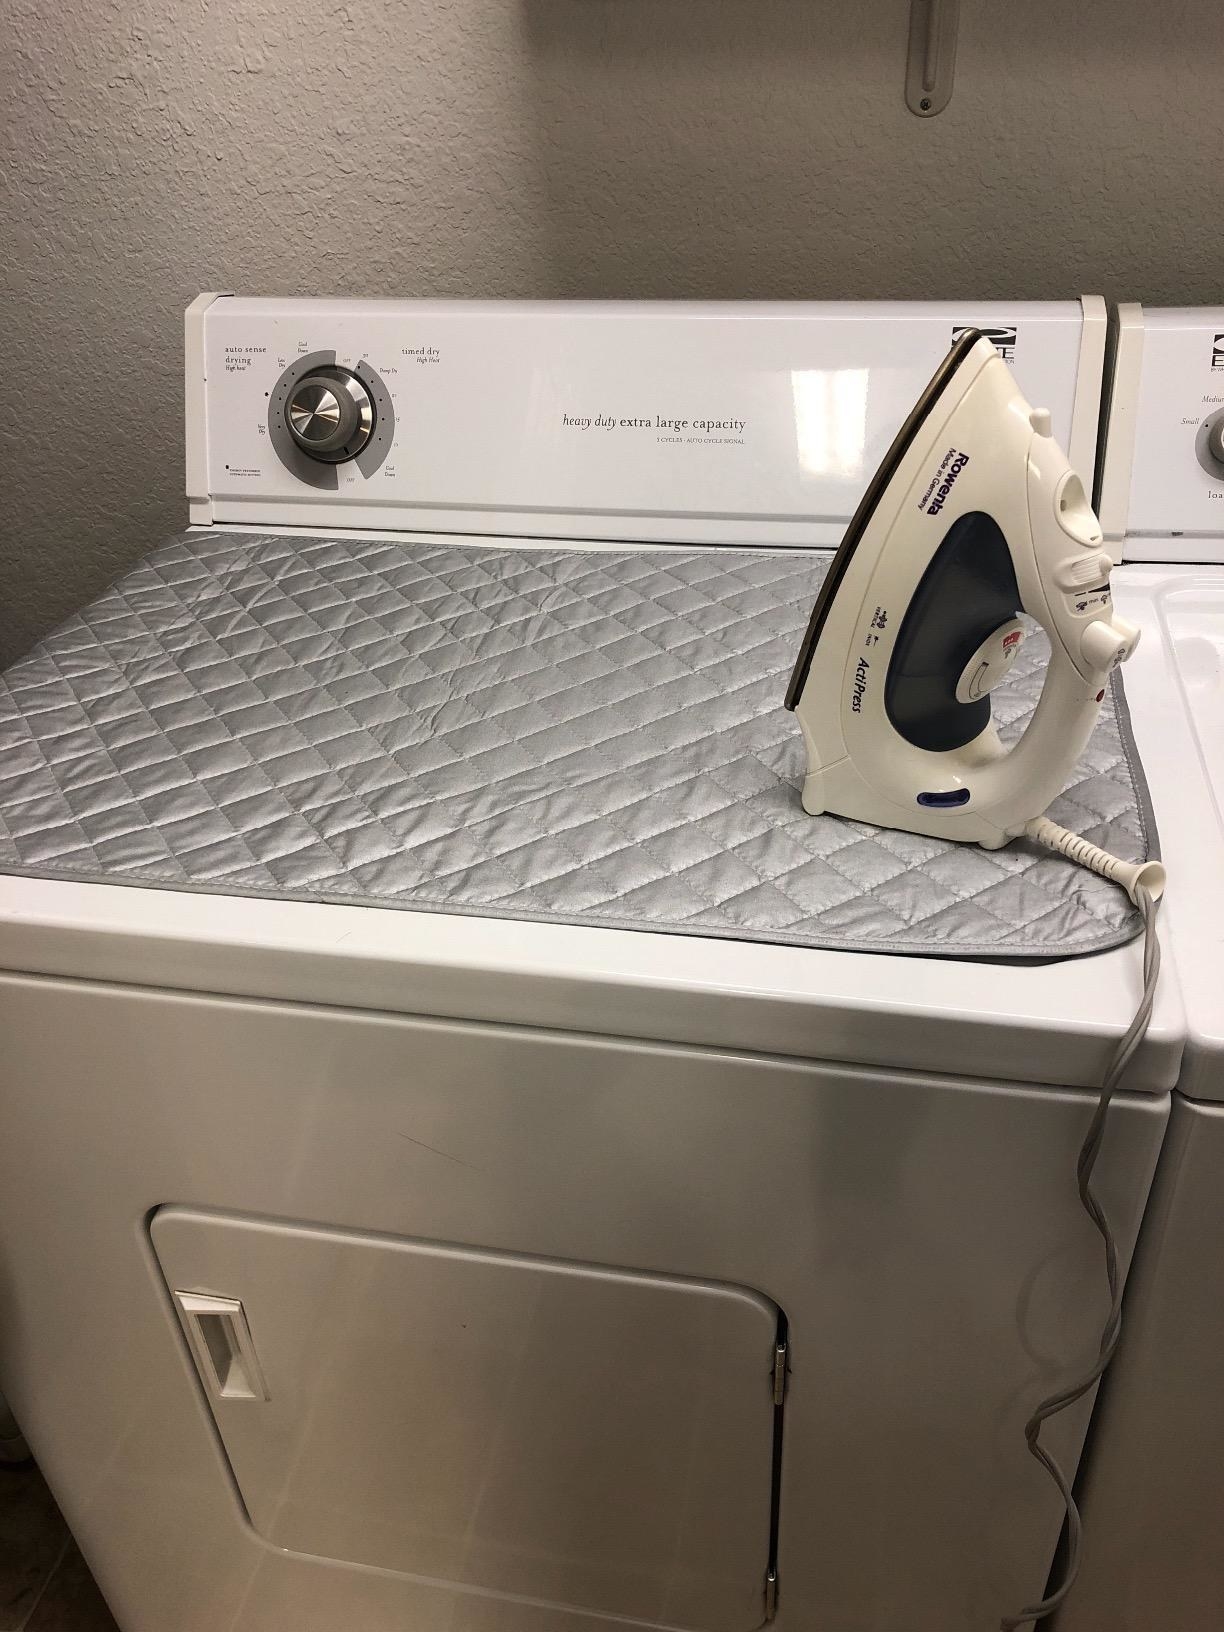 a reviewer photo of the magnetic ironing mat on a dryer